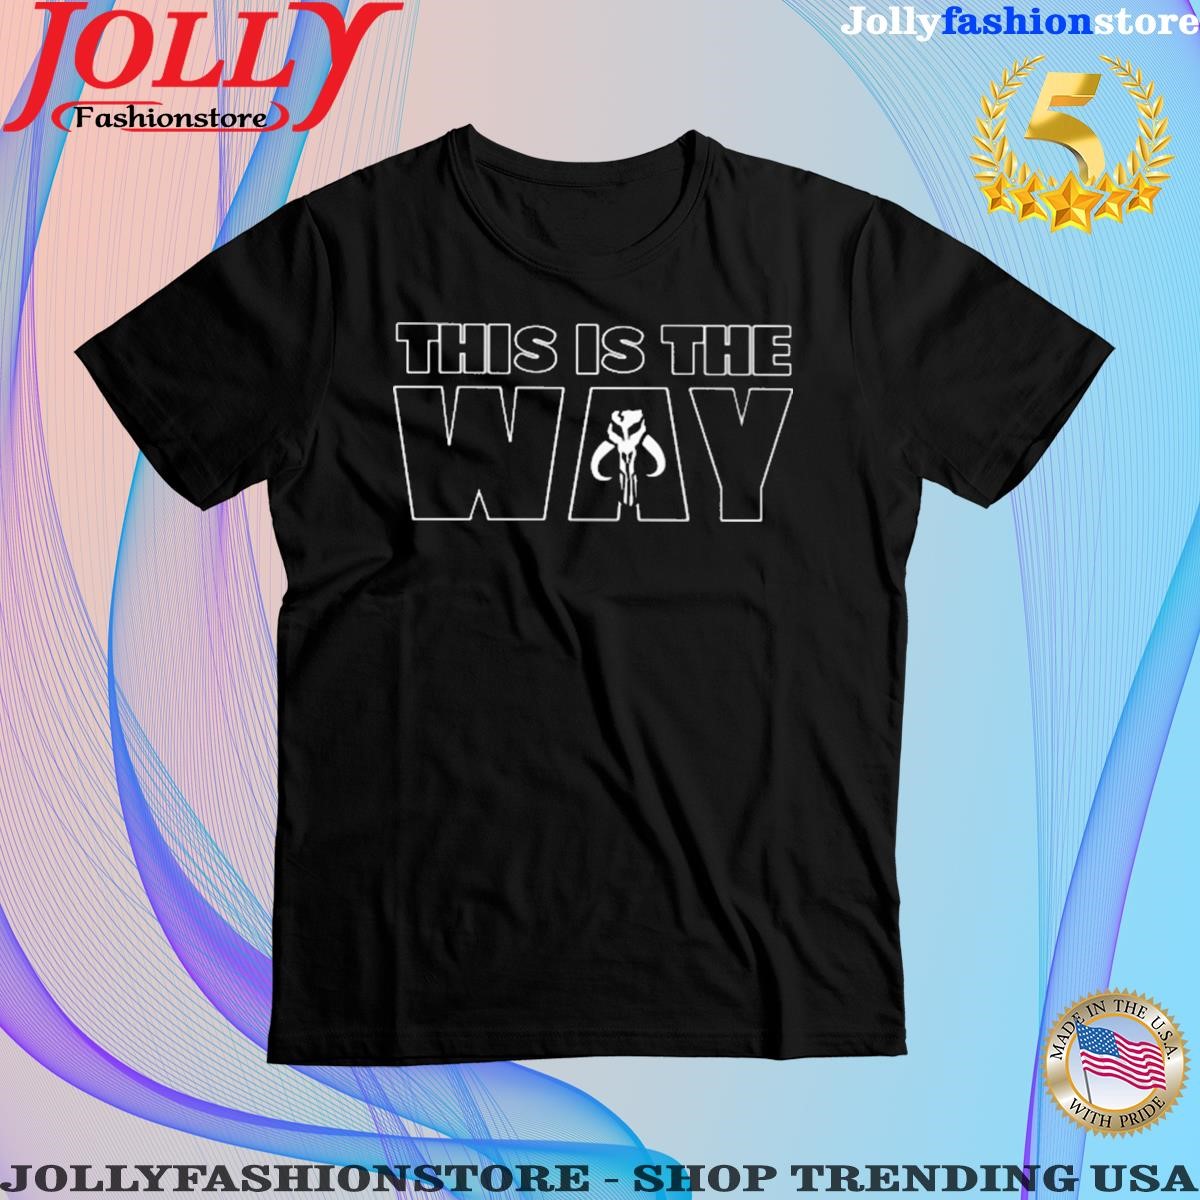 This is the way T-shirt